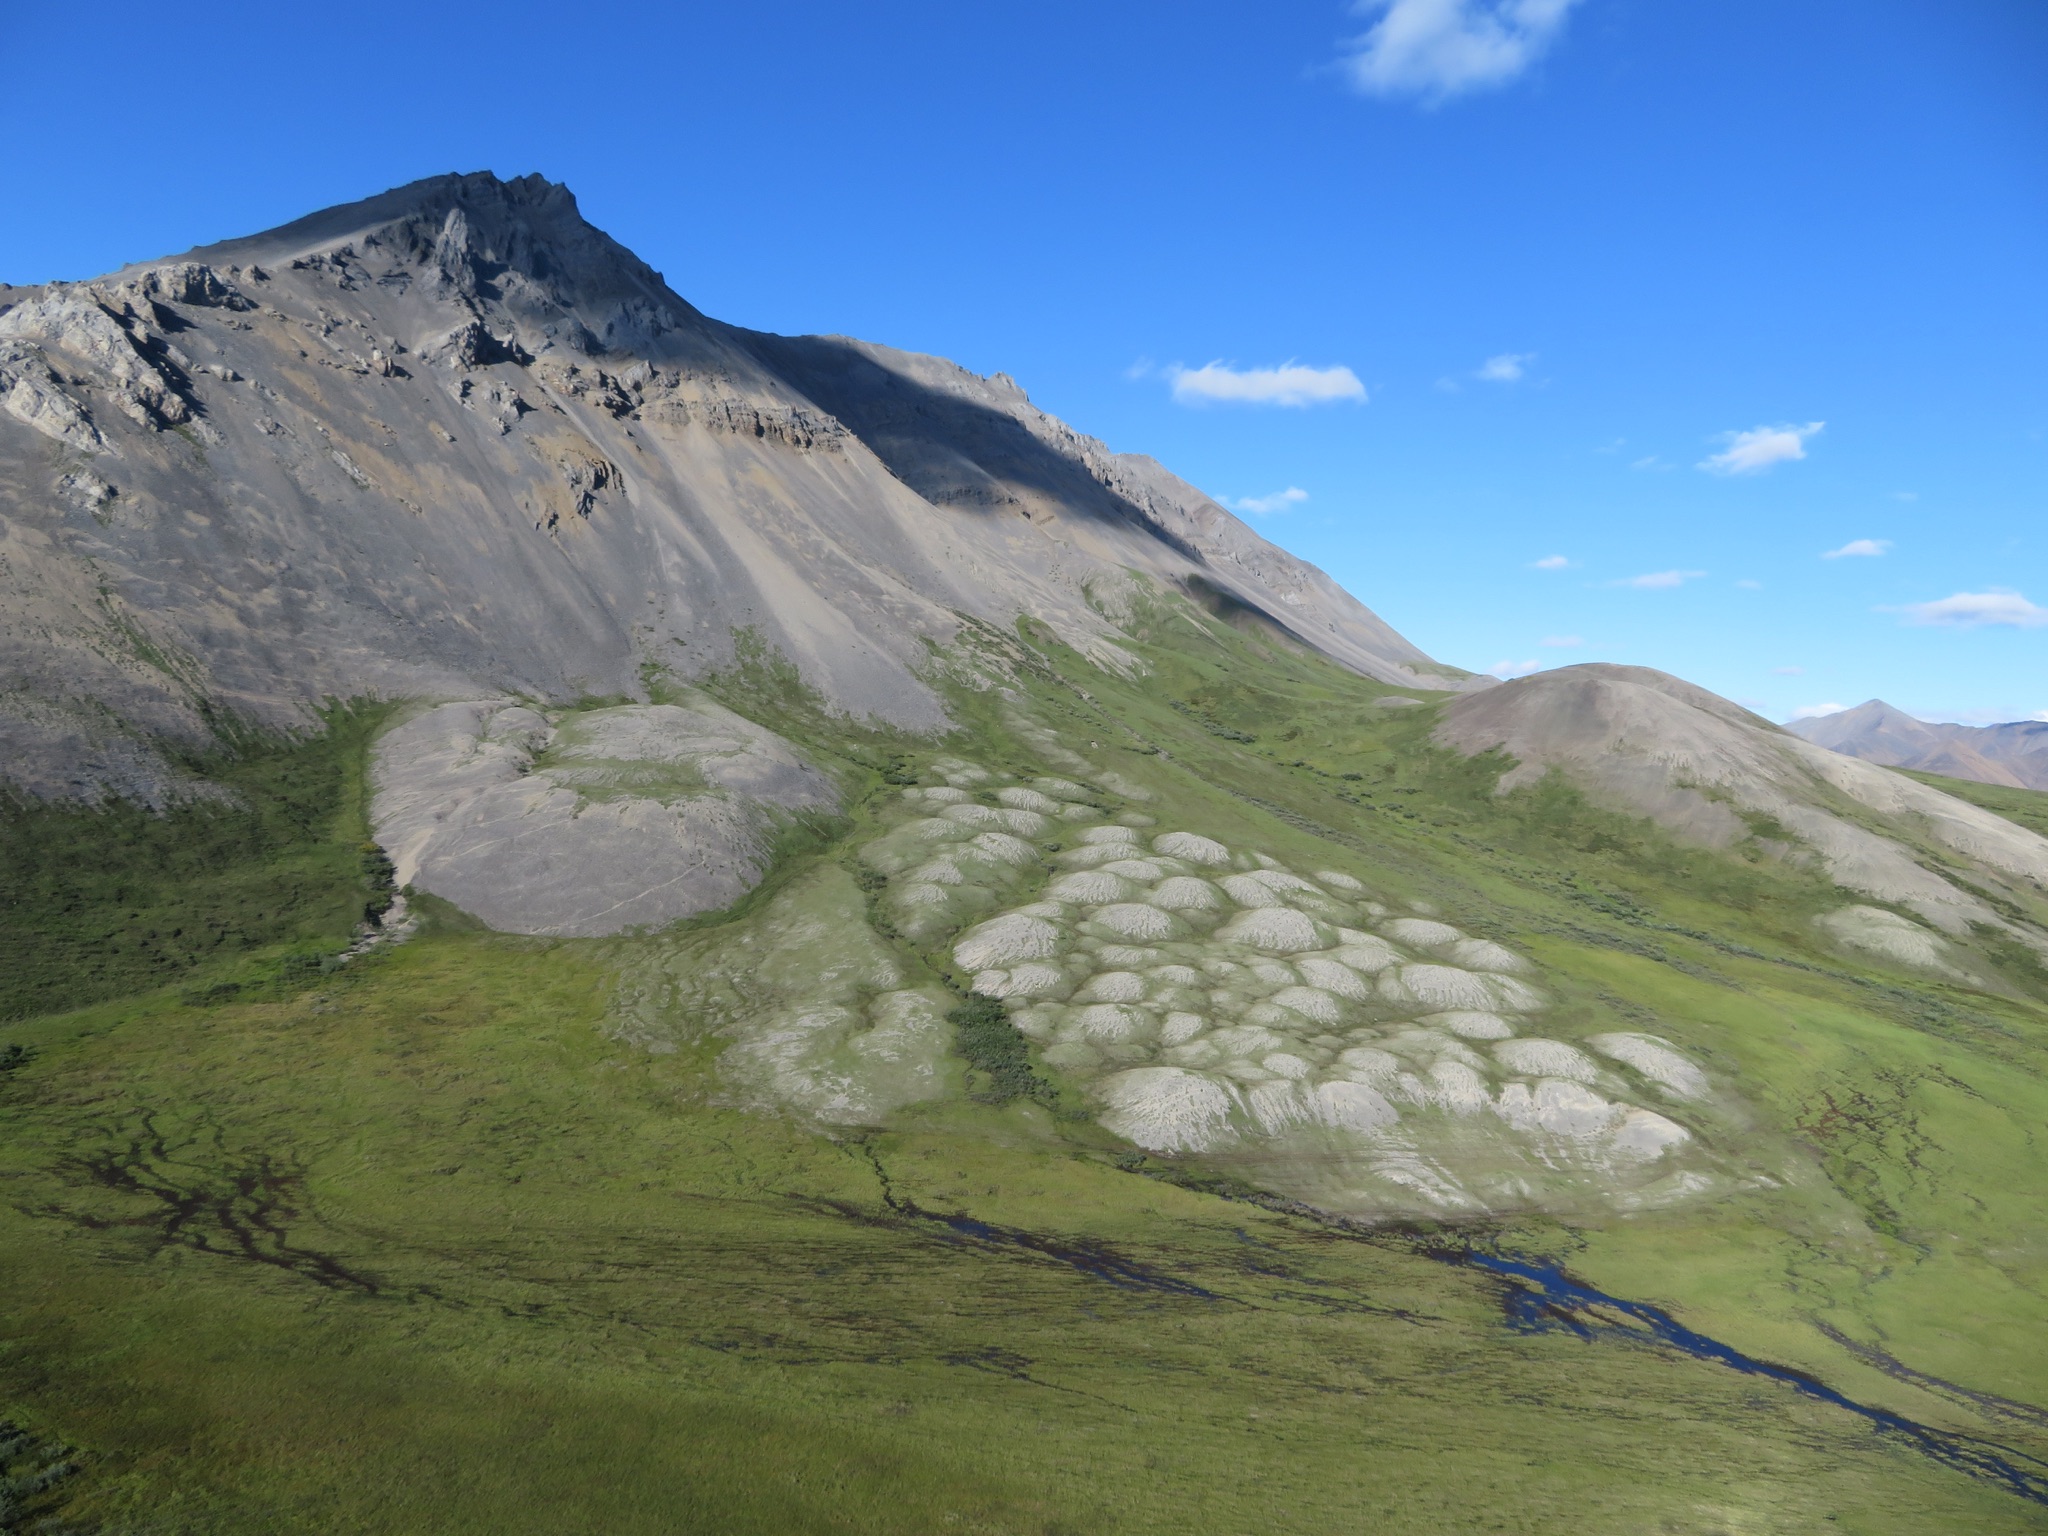 Aerial shot of mountains and green tundra against a blue sky in Noatak National Preserve.